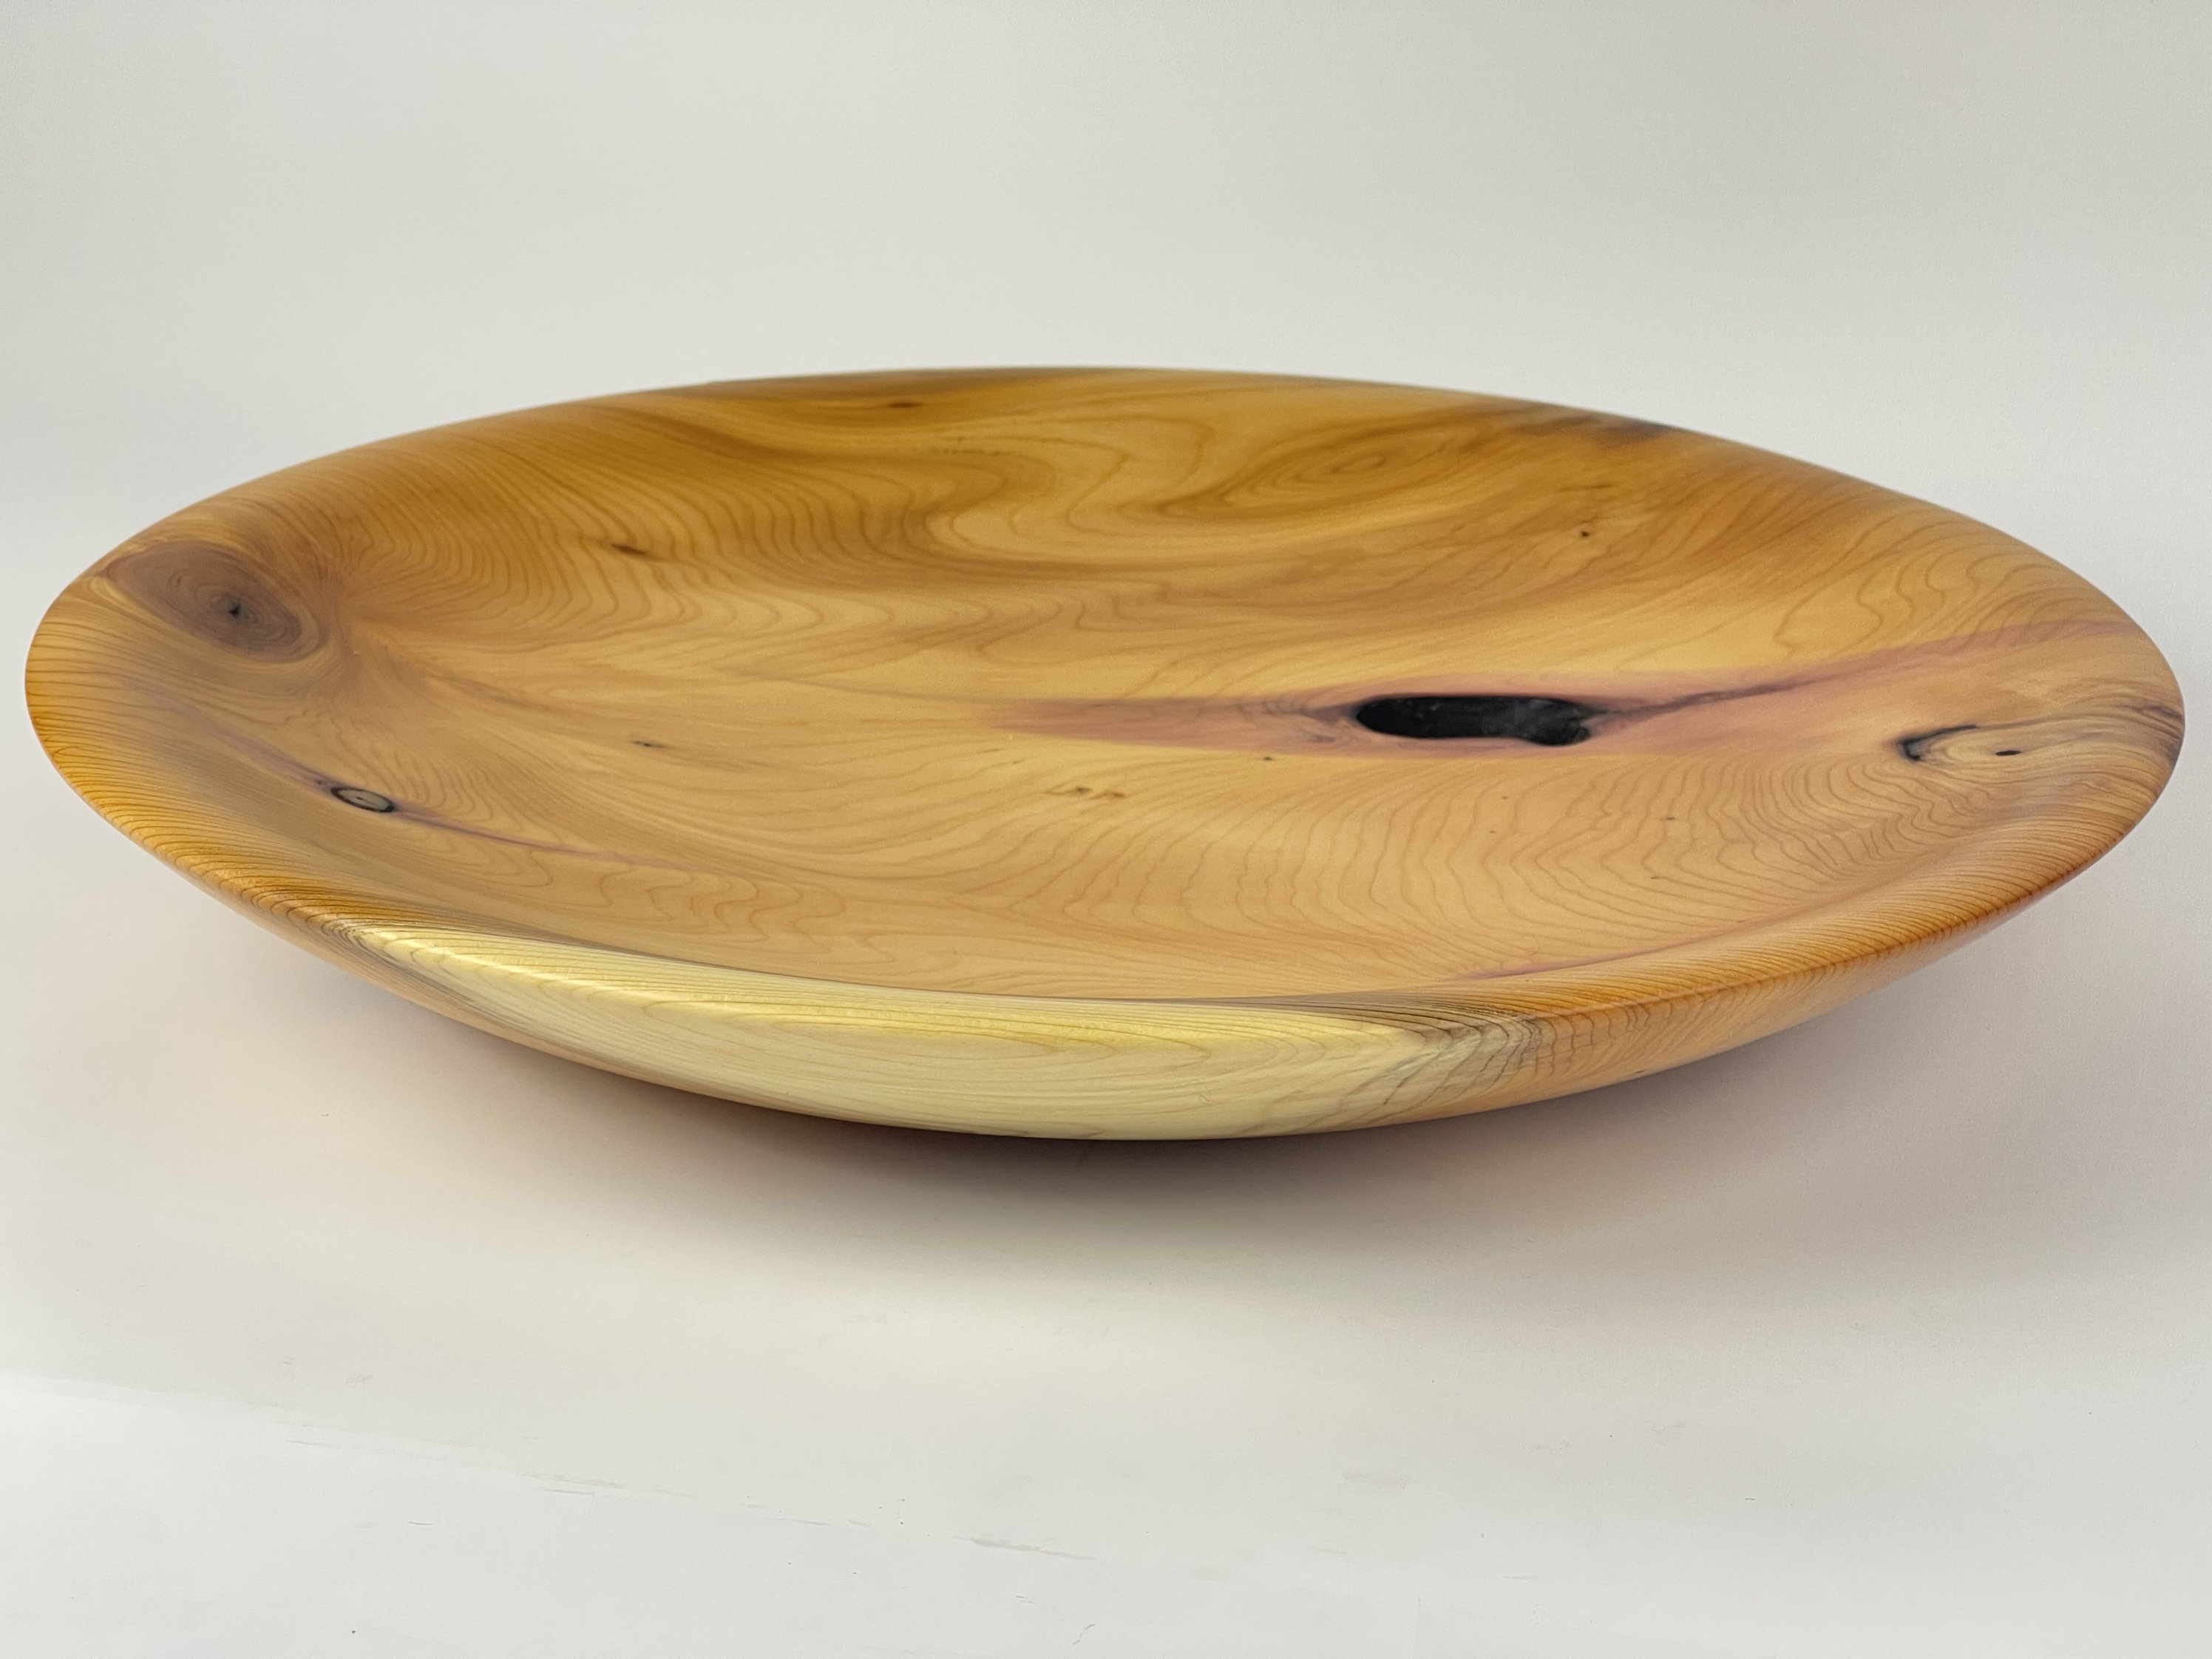 Turned Kingwood Banded Cup – Yew Tree House